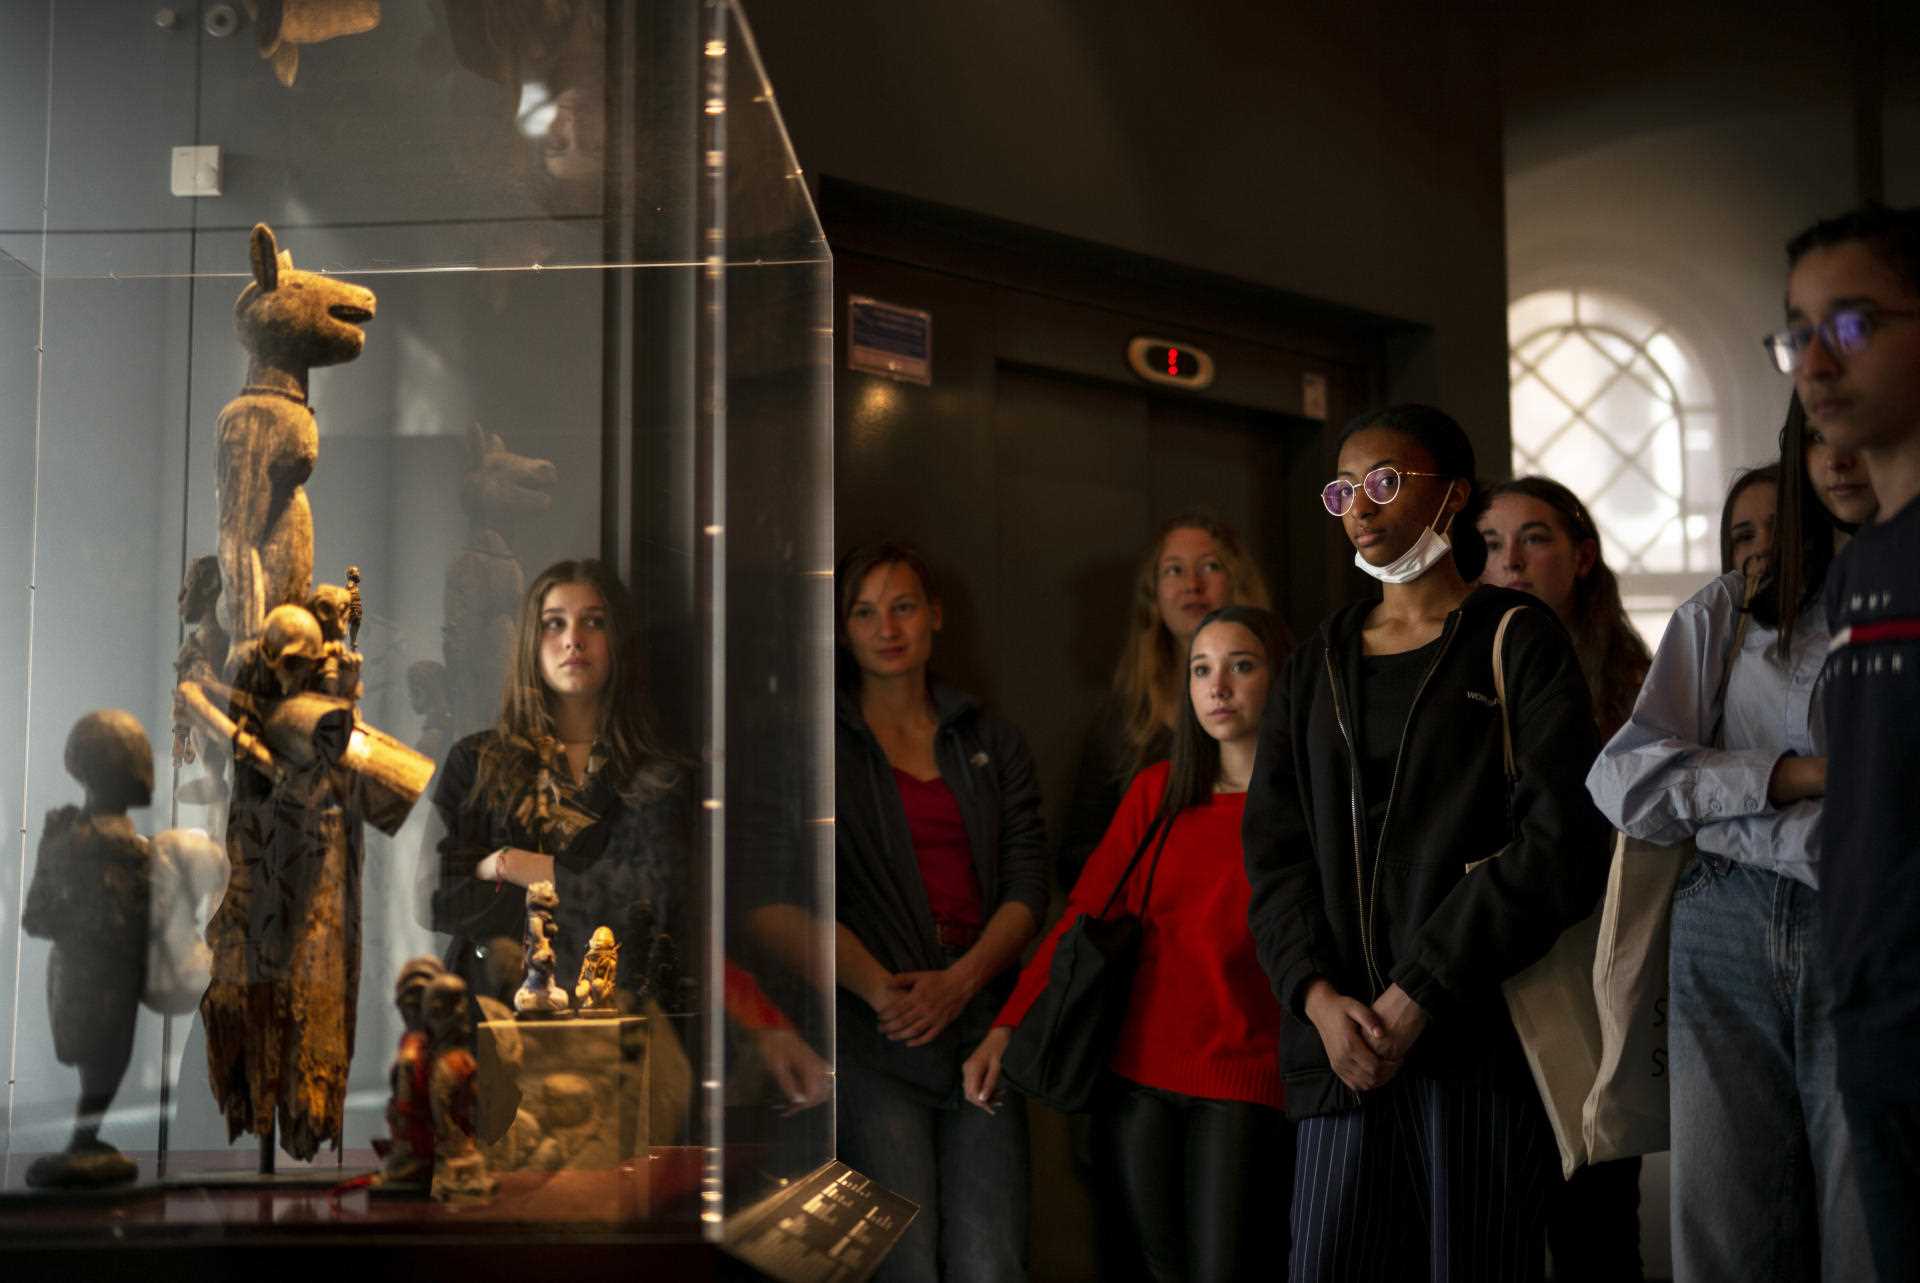 Visit to the Vodou Museum (Strabourg), April 12, 2022.